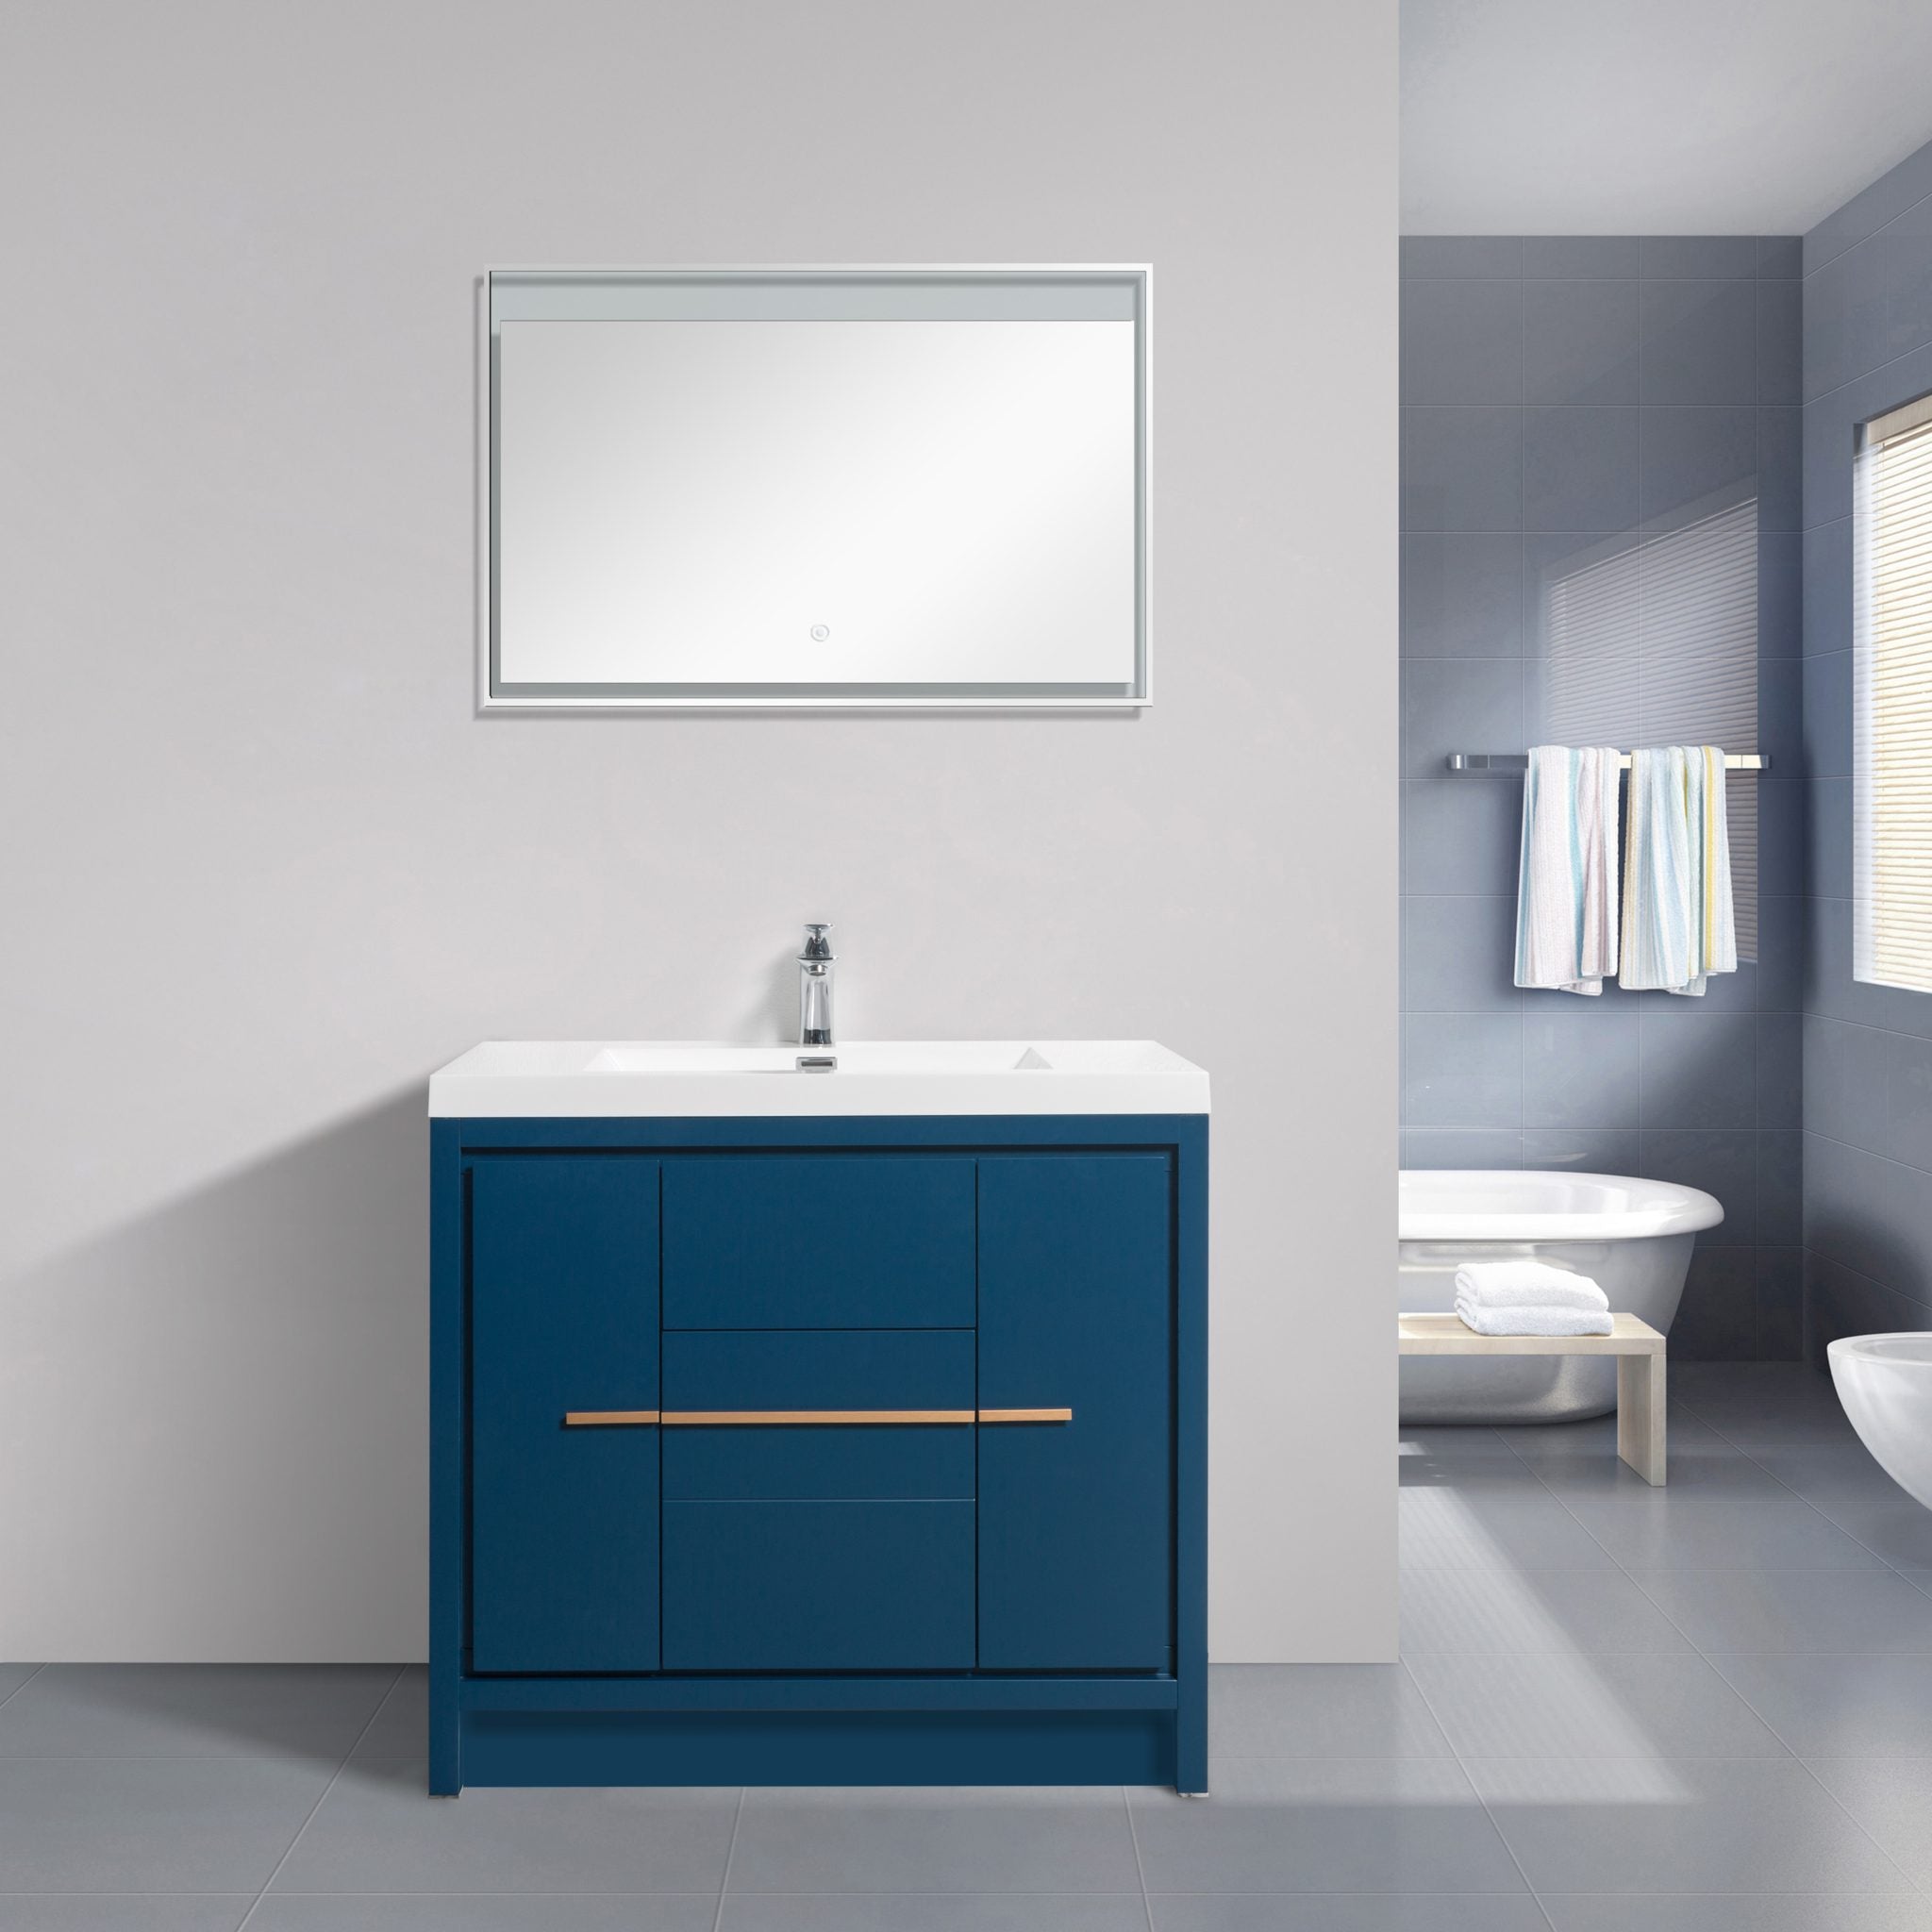 Granada 35.5 Matte Blue With Brush Rose Gold Handle Cabinet, Square Cultured Marble Sink, Free Standing Modern Vanity Set